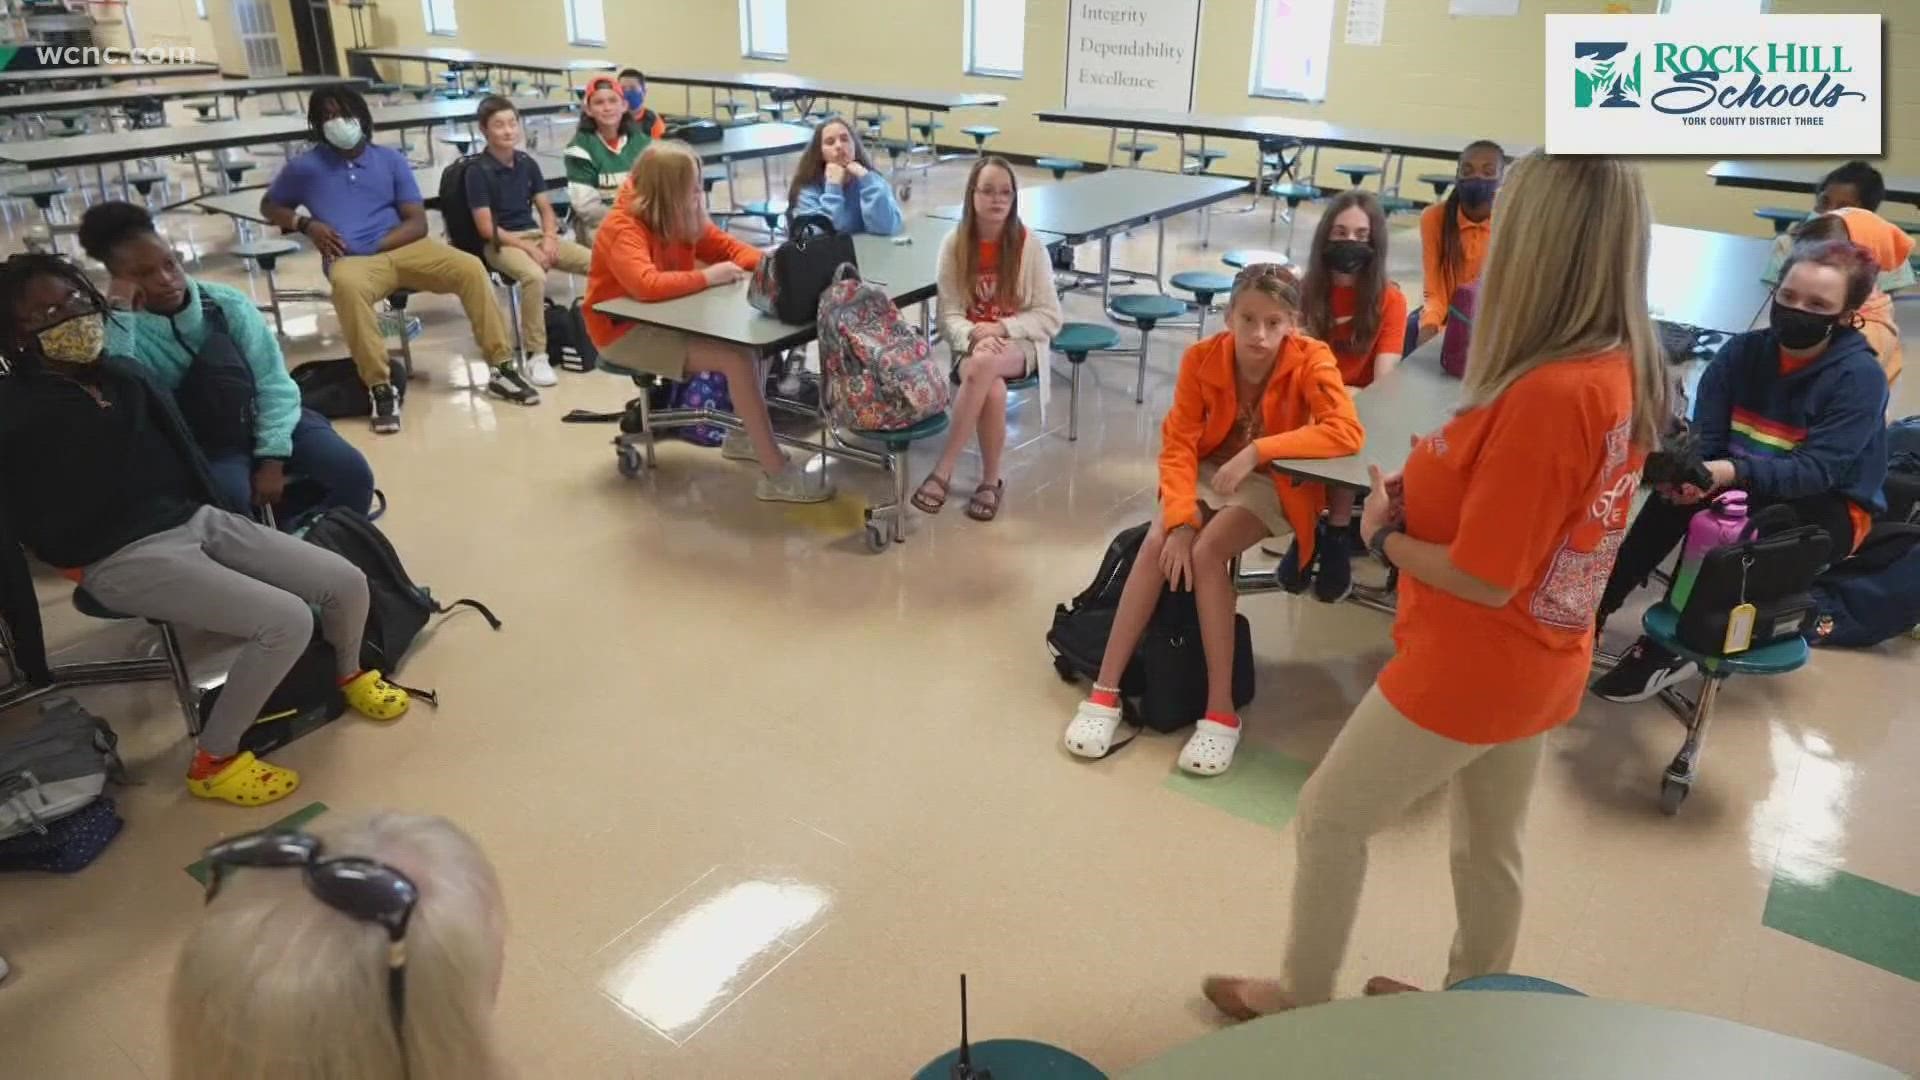 To take a stand against bullying, students and staff at schools across the Carolinas wore orange Wednesday for Unity Day.